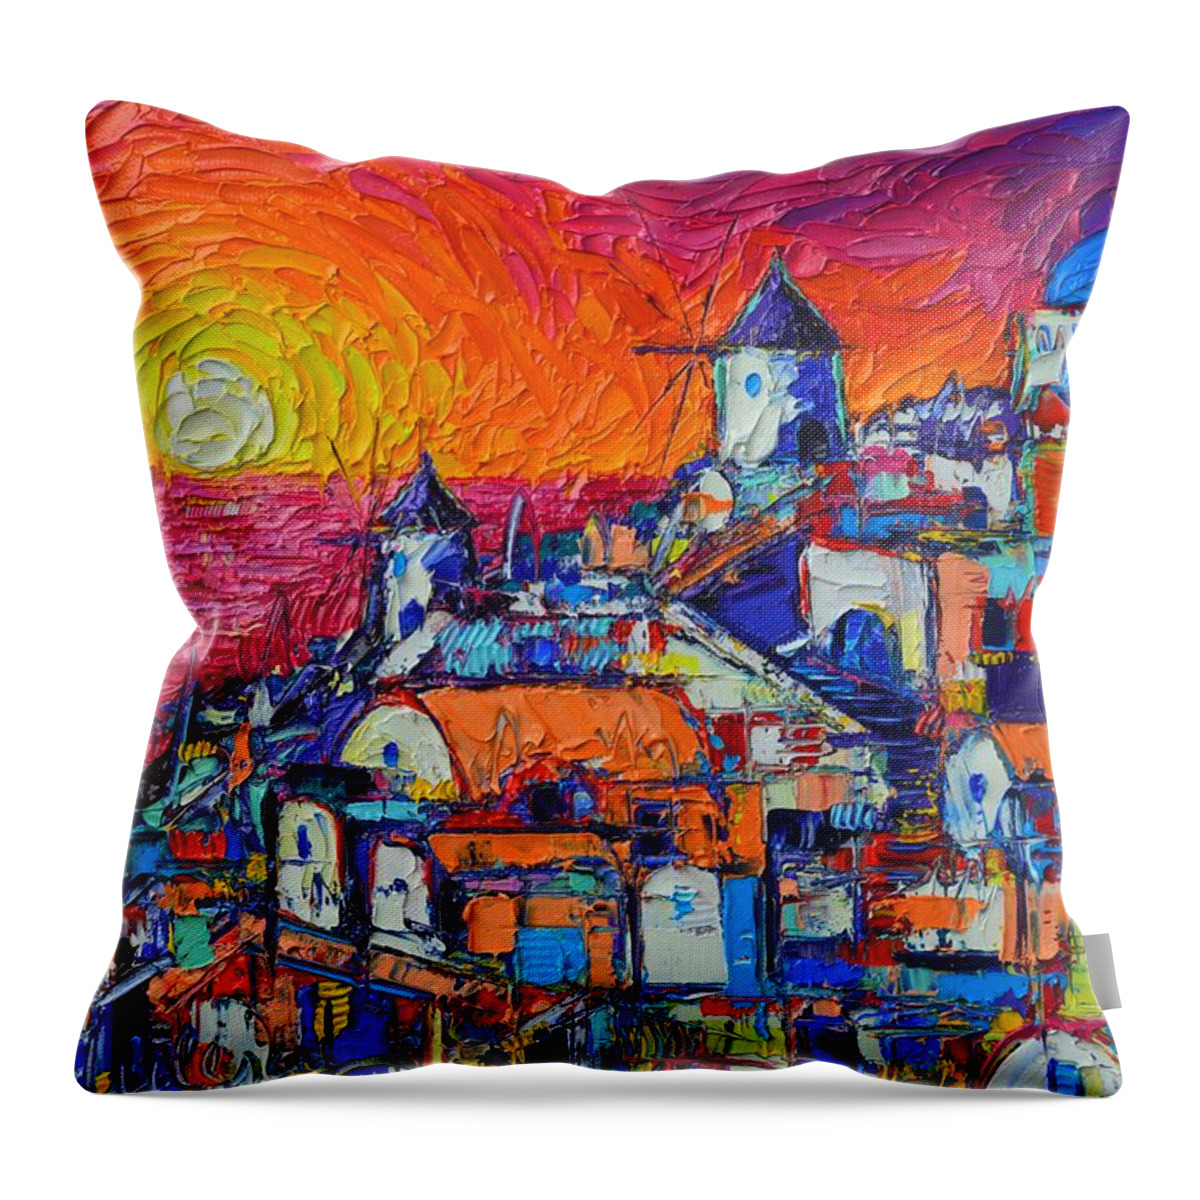 Santorini Throw Pillow featuring the painting ABSTRACT SANTORINI OIA SUNSET cityscape impasto palette knife oil painting by Ana Maria Edulescu by Ana Maria Edulescu